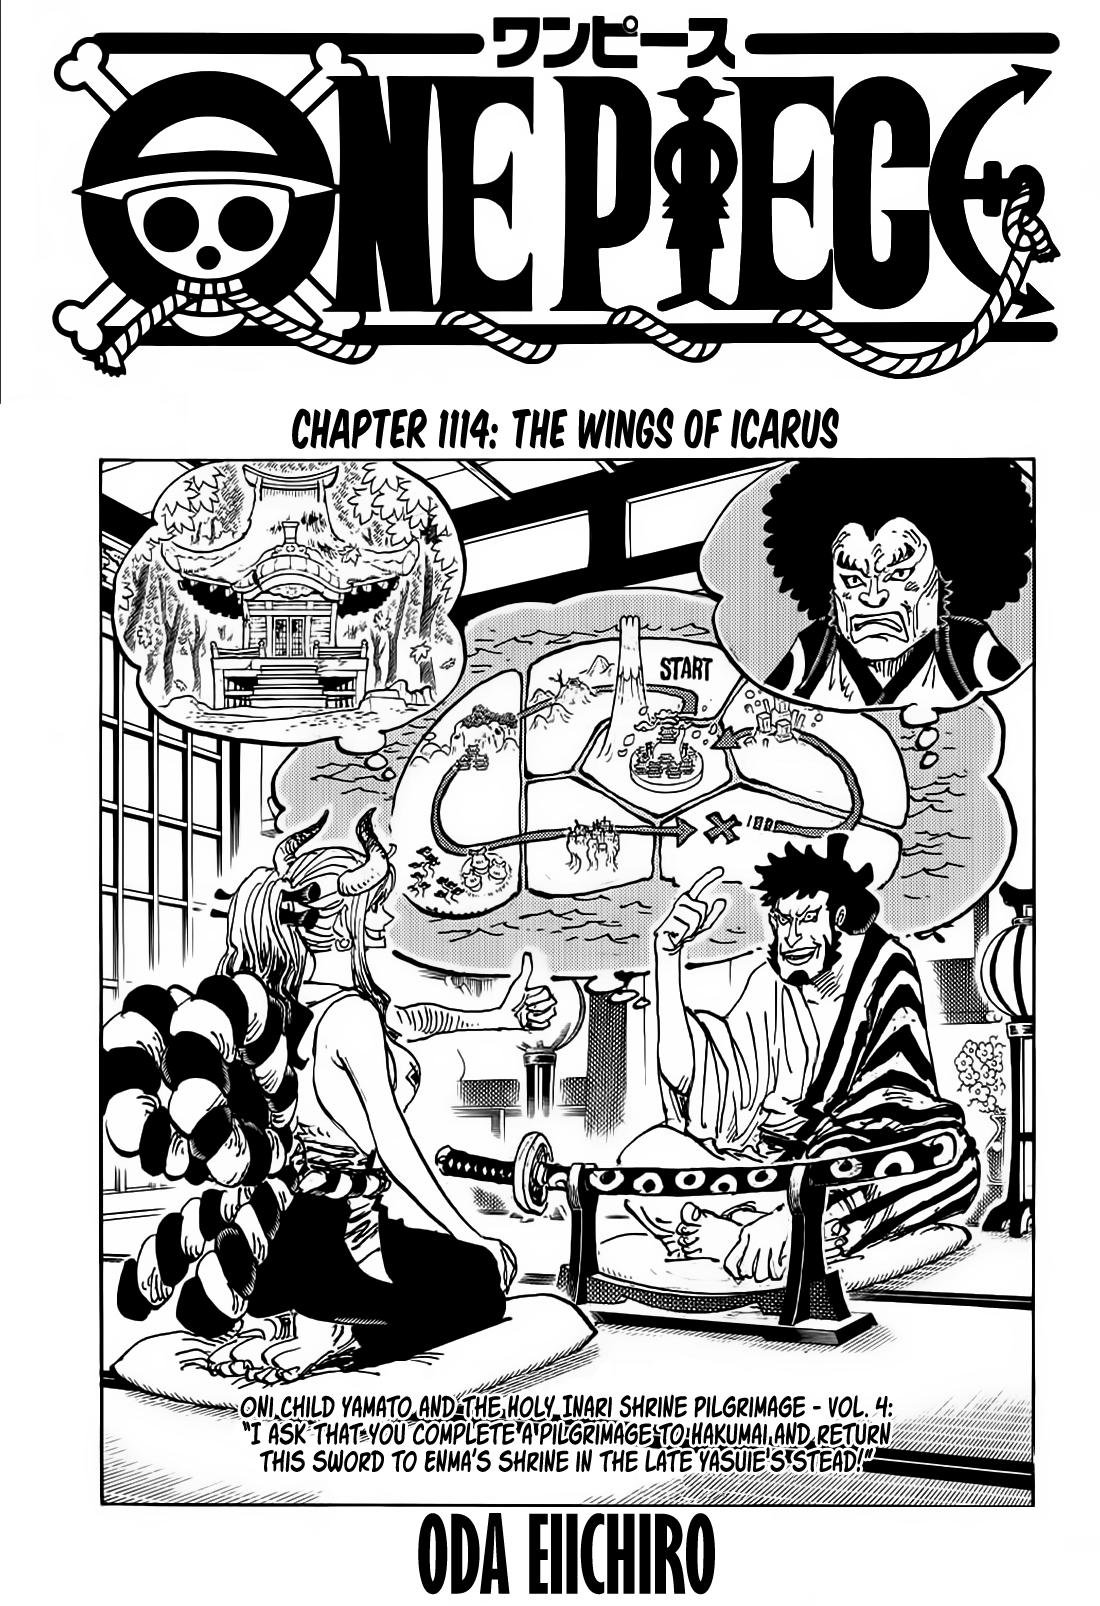 One Piece, Chapter 1114 | TcbScans Net - Free Manga Online in High 